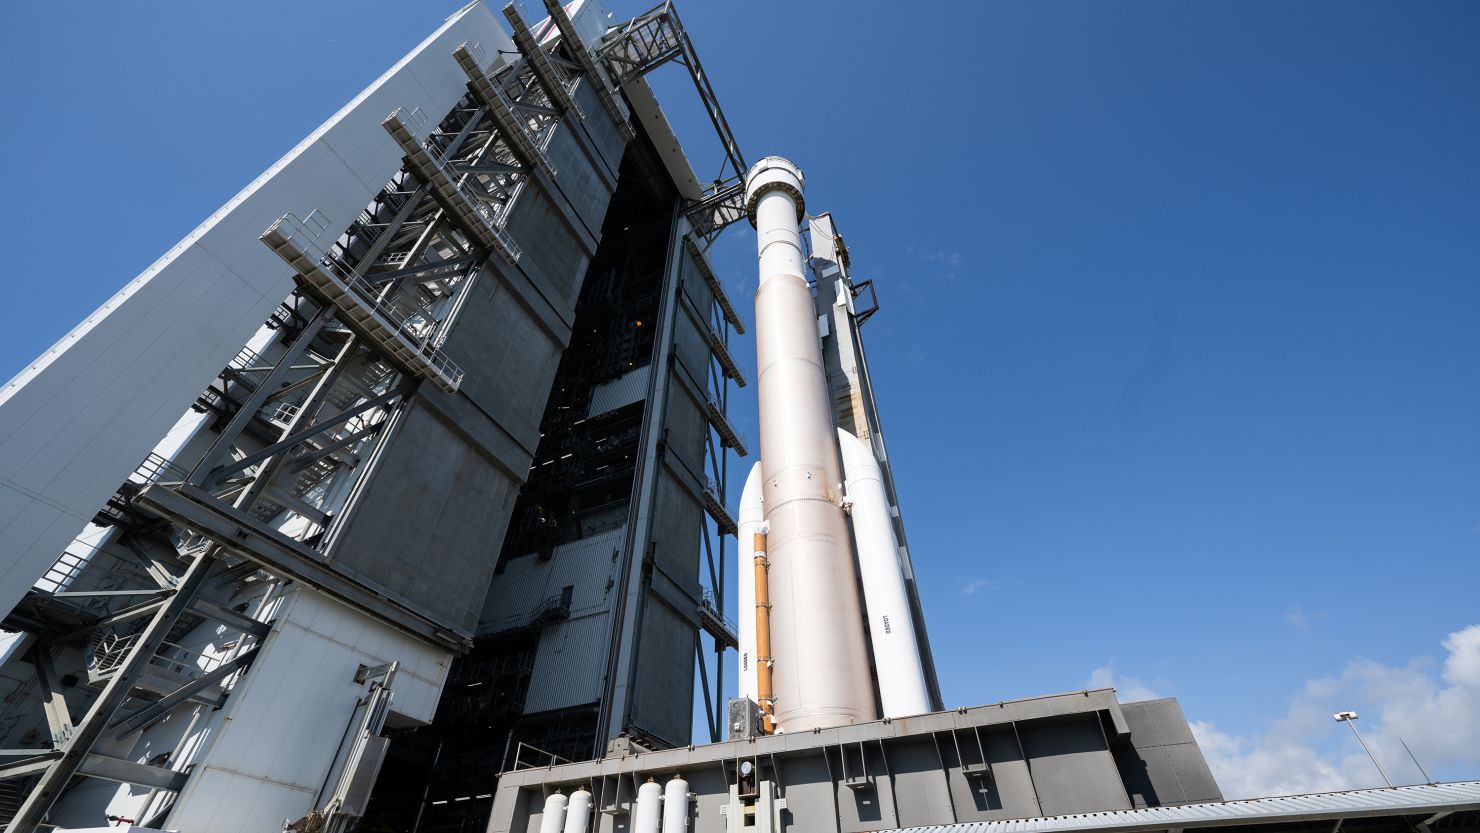 The United Launch Alliance Atlas V rocket, with Boeing's Starliner spacecraft atop it, will roll back into the Vertical Integration Facility for a valve replacement.